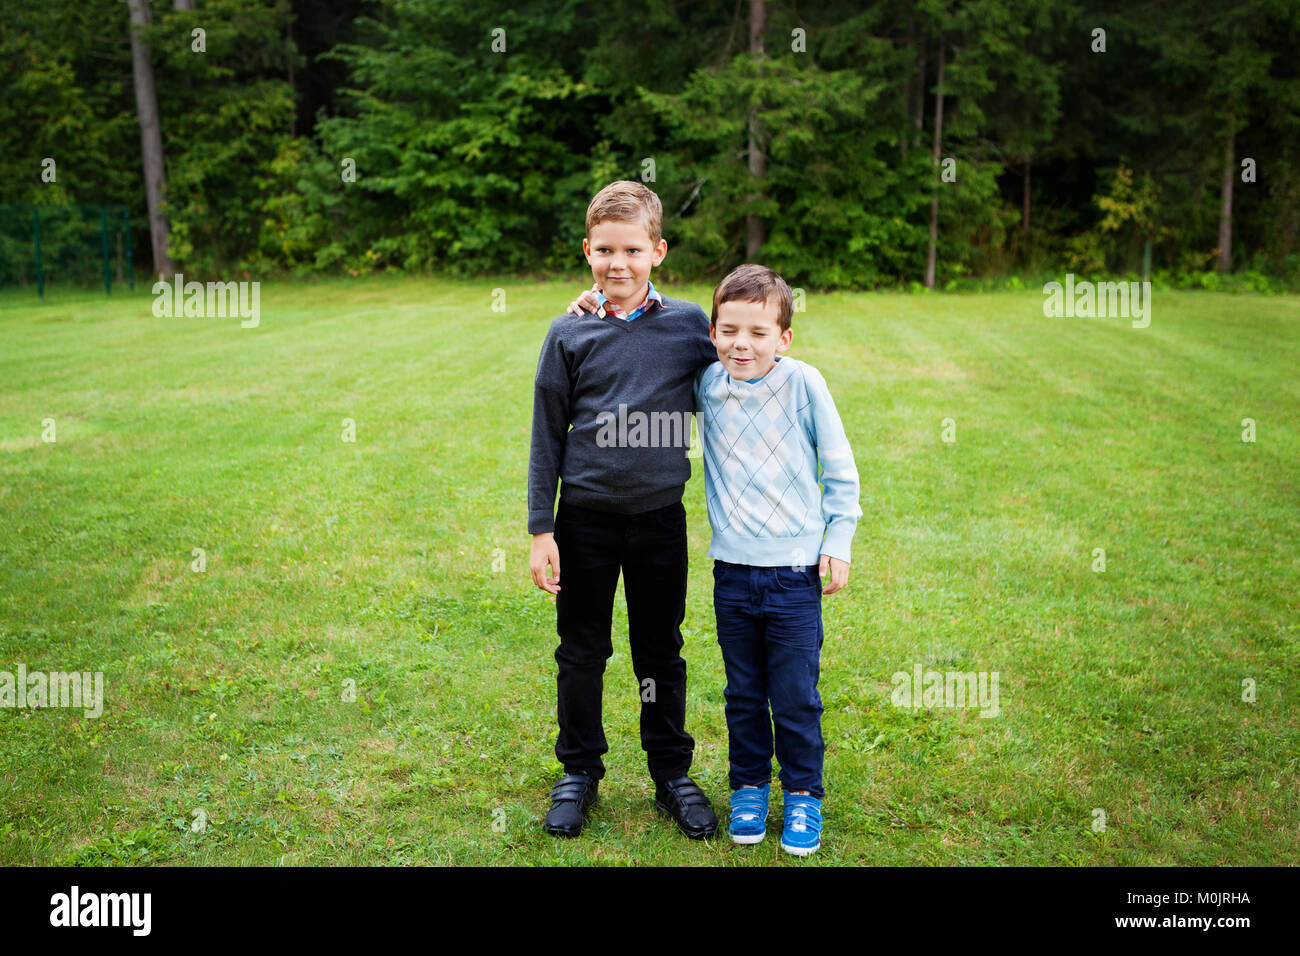 Two boys standing on lawn with hand on each shoulder dressed in formalwear -smiling, making fun, brothers portrait, togetherness, mischievous, bonding Stock Photo